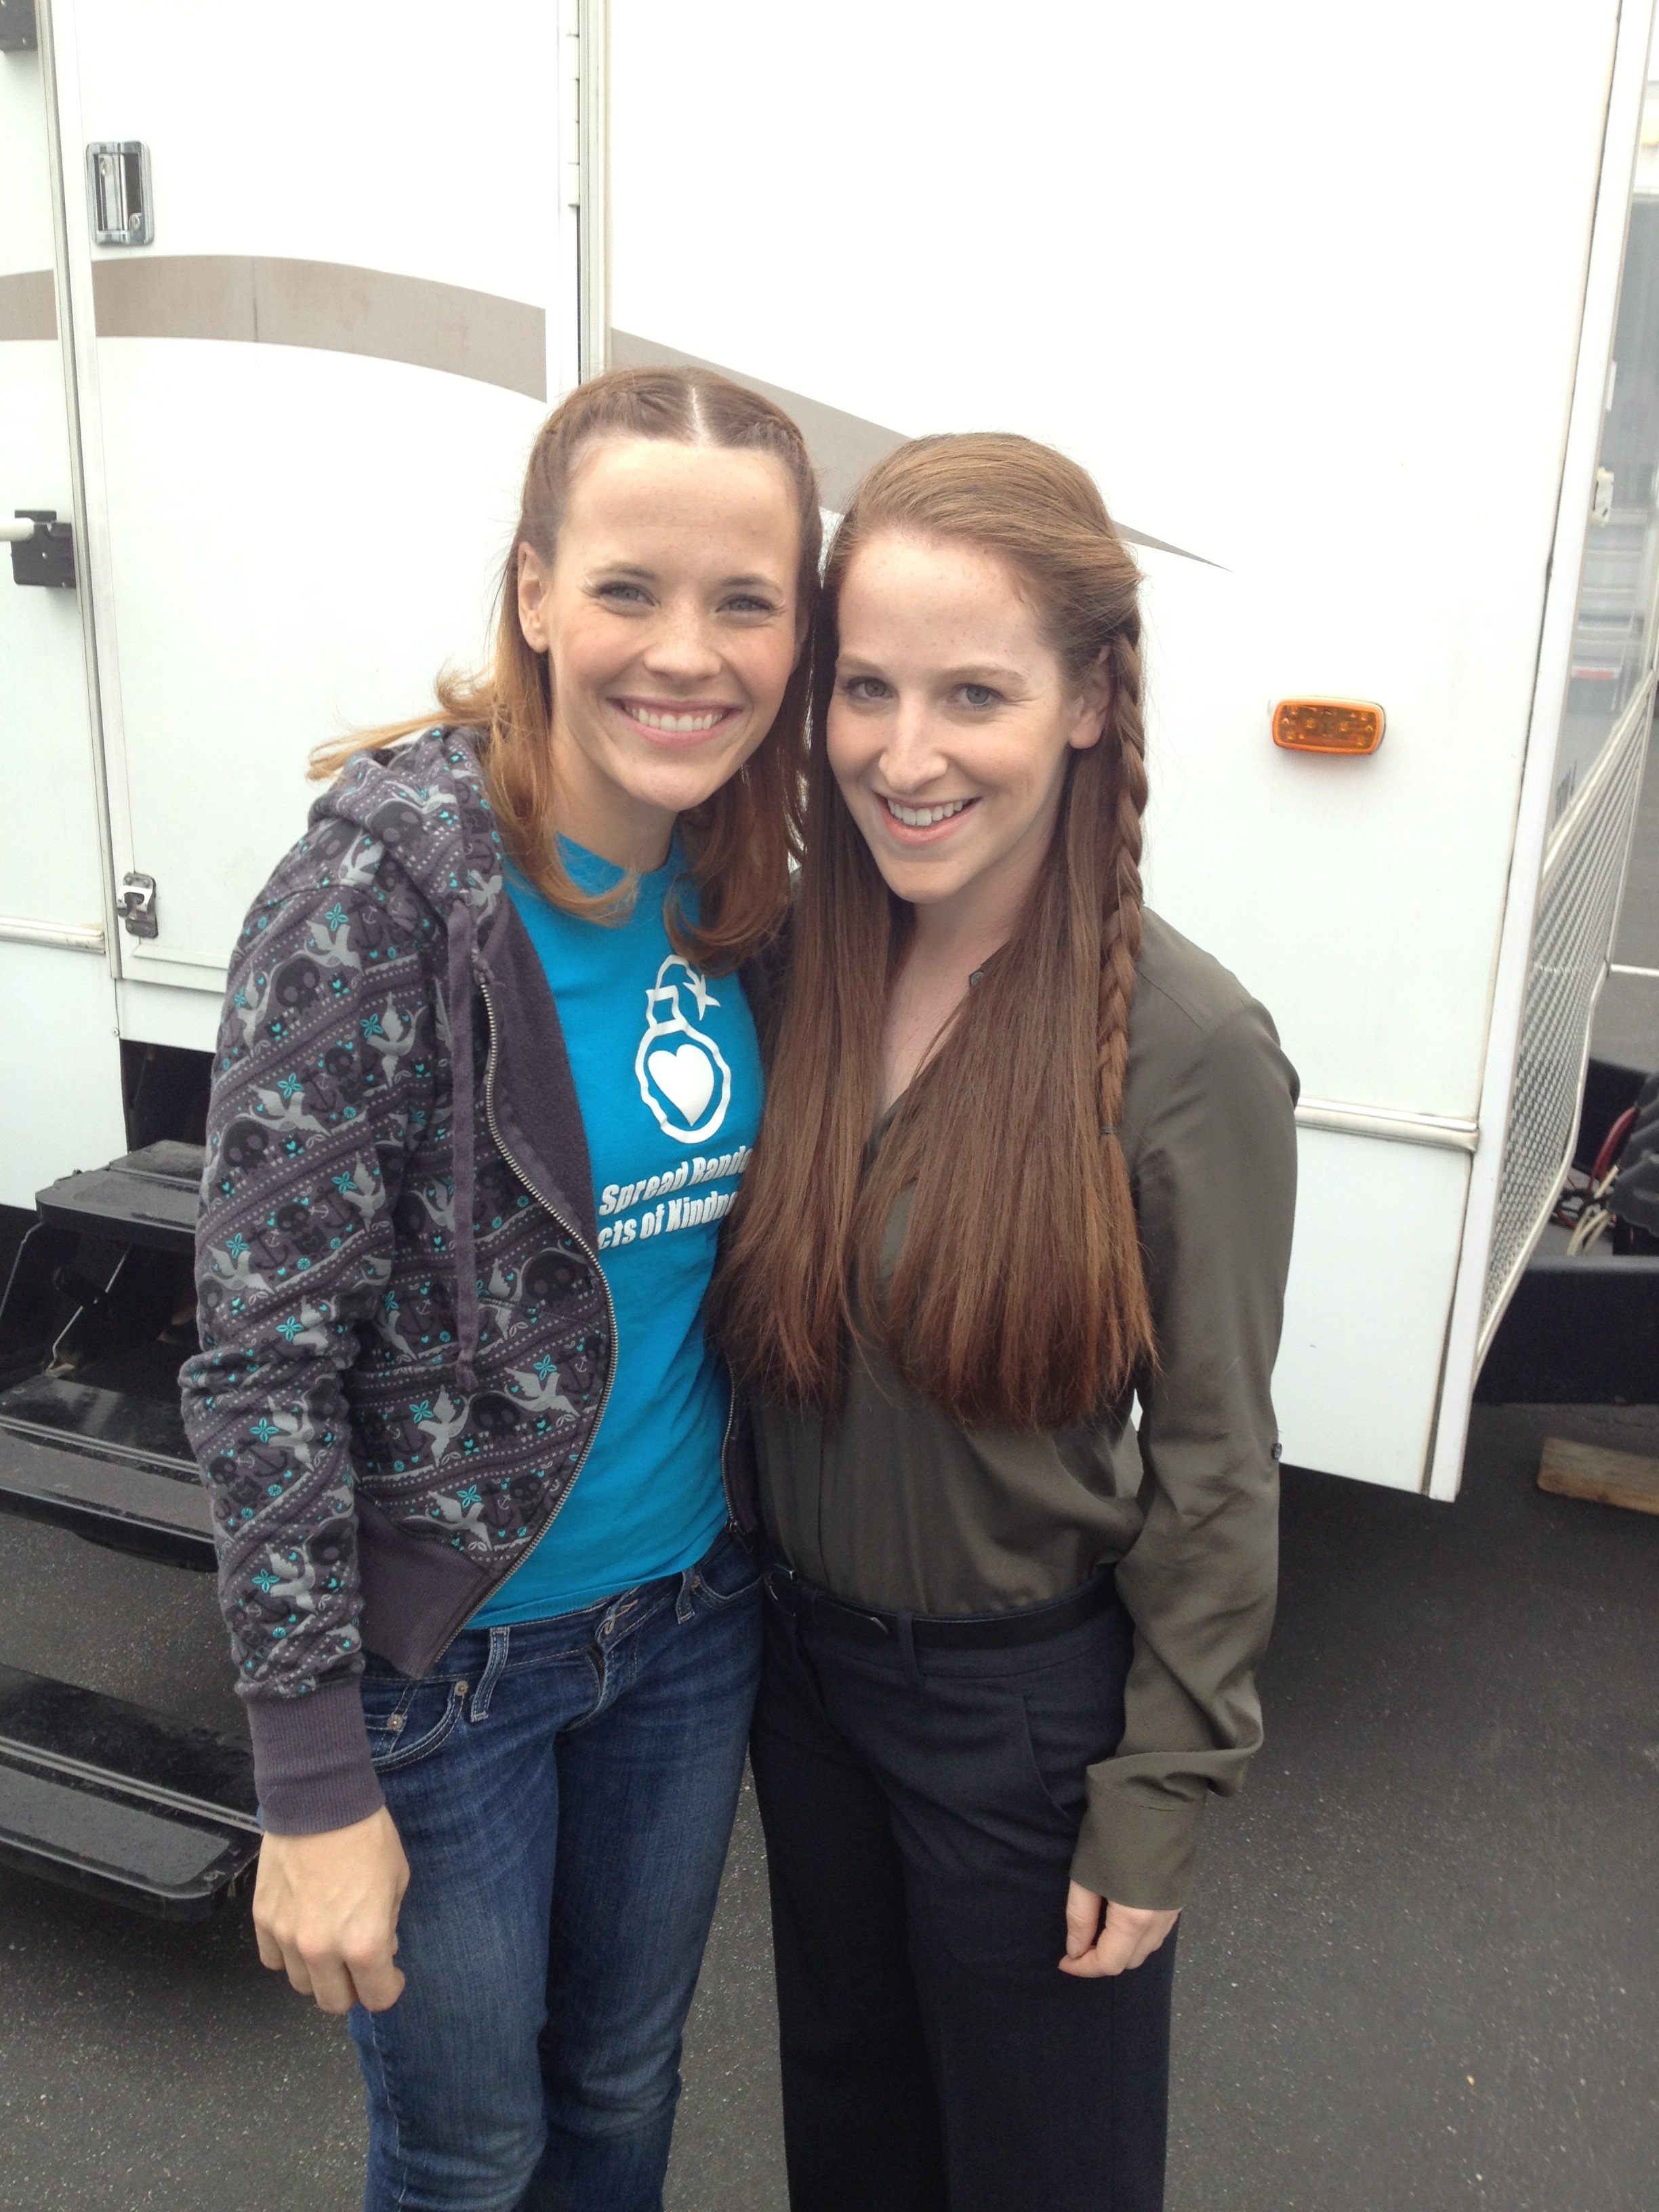 Natasha Sattler and Katie Leclerc on the set of Switched At Birth